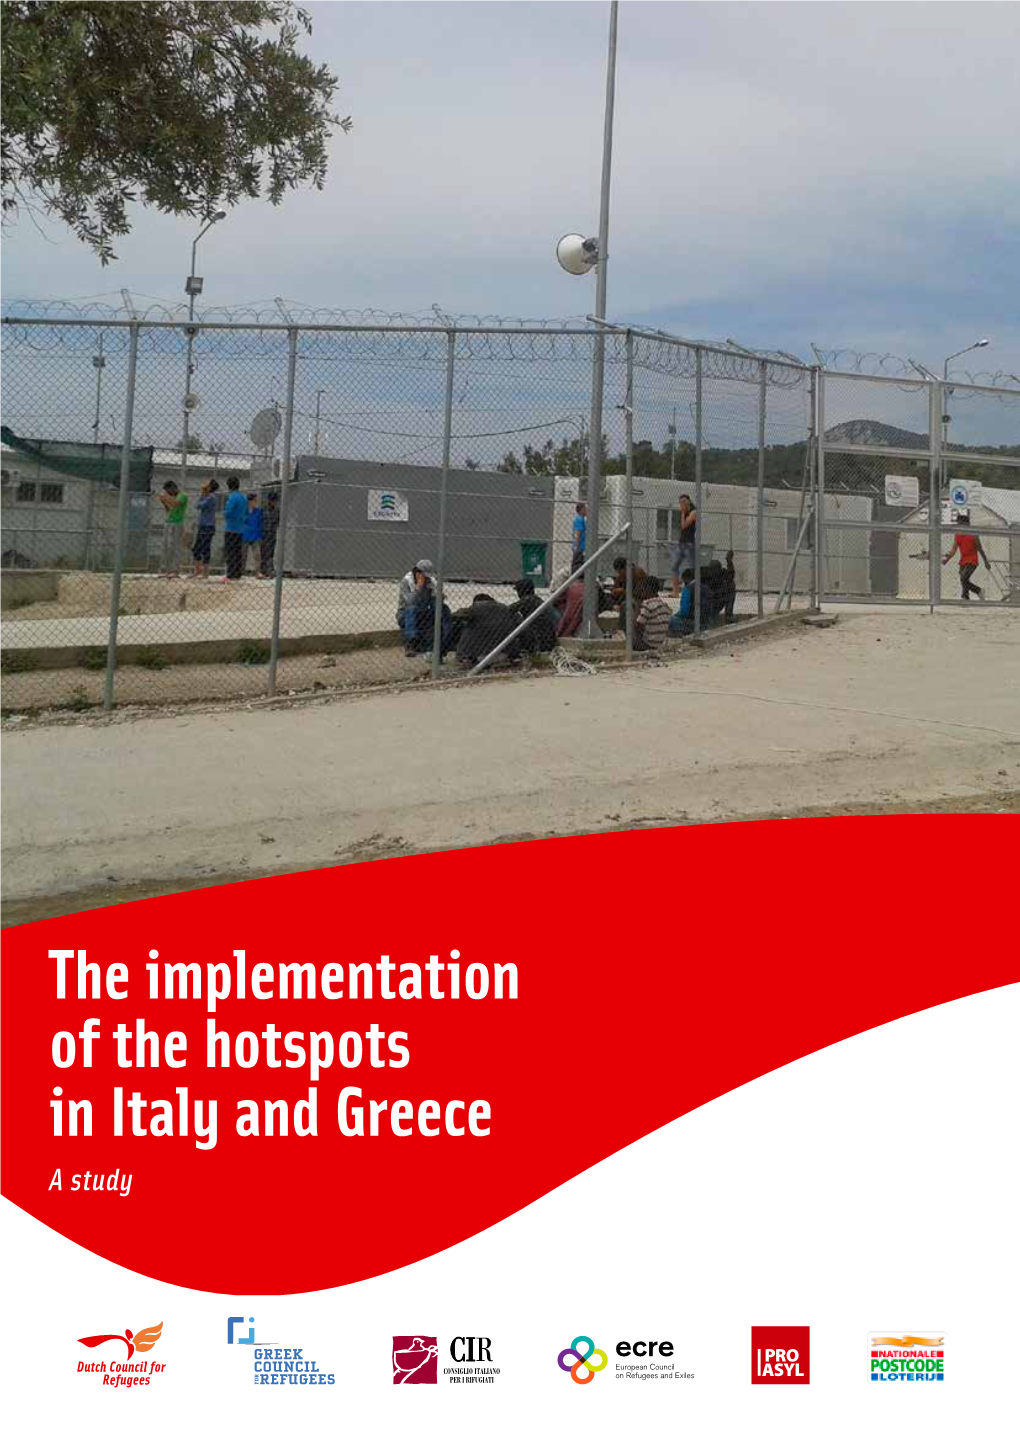 The Implementation of the Hotspots in Italy and Greece a Study the Implementation of the Hotspots in Italy and Greece a Study